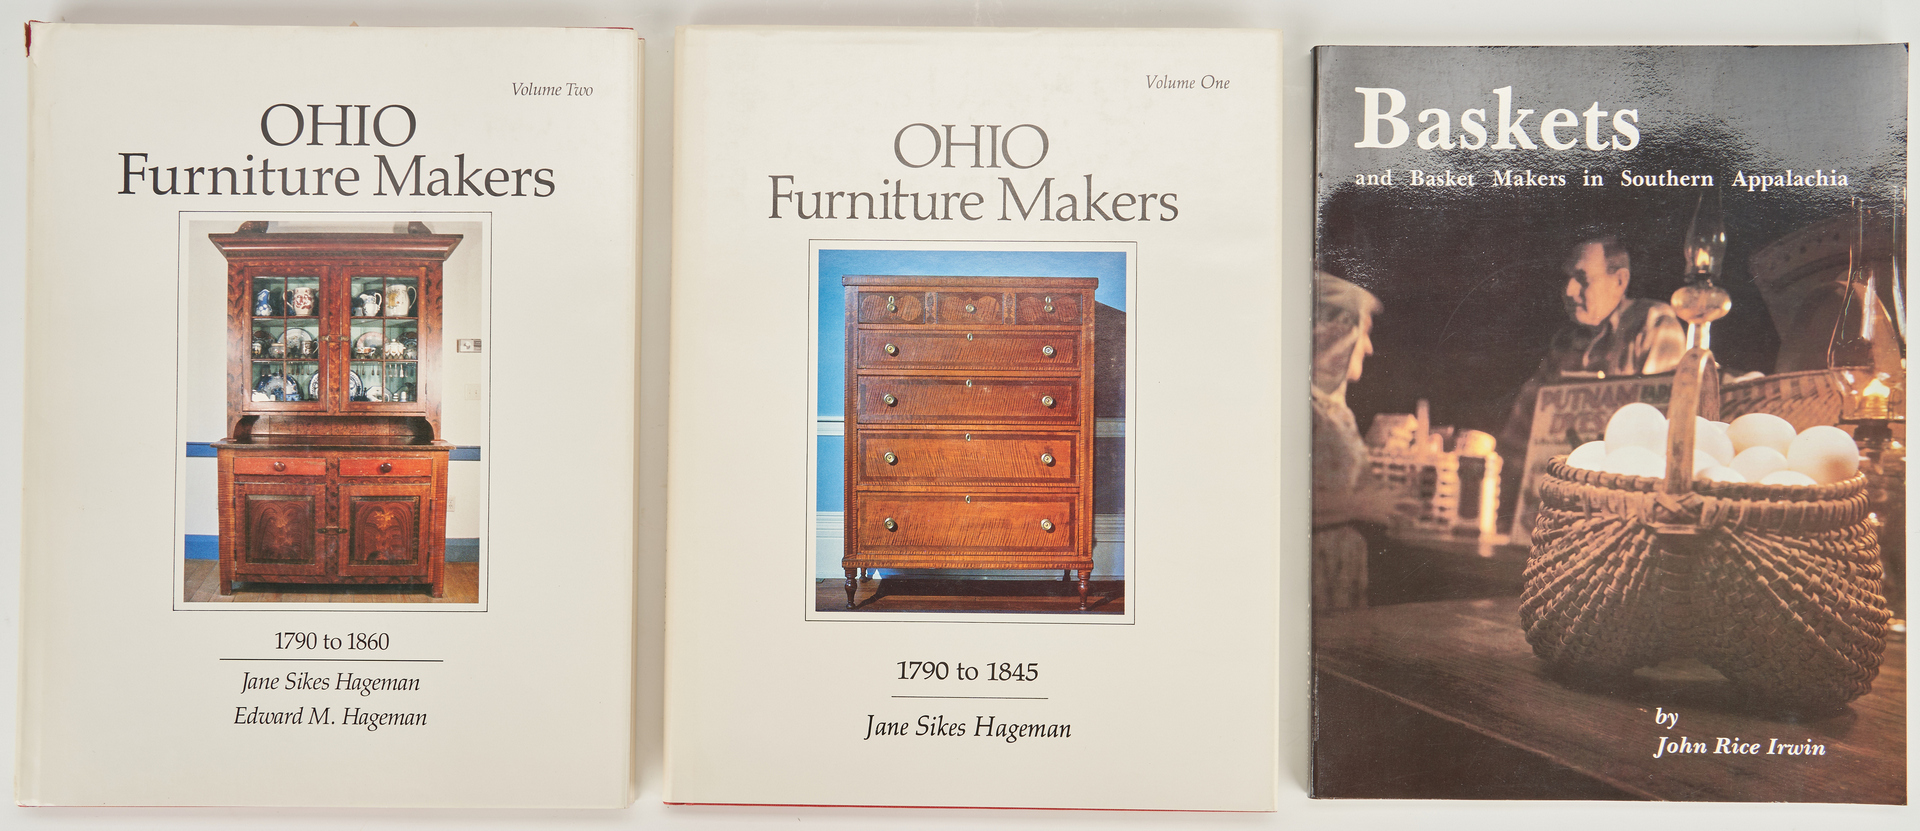 Lot 649: 12 TN, KY, OH Art and Antique Books